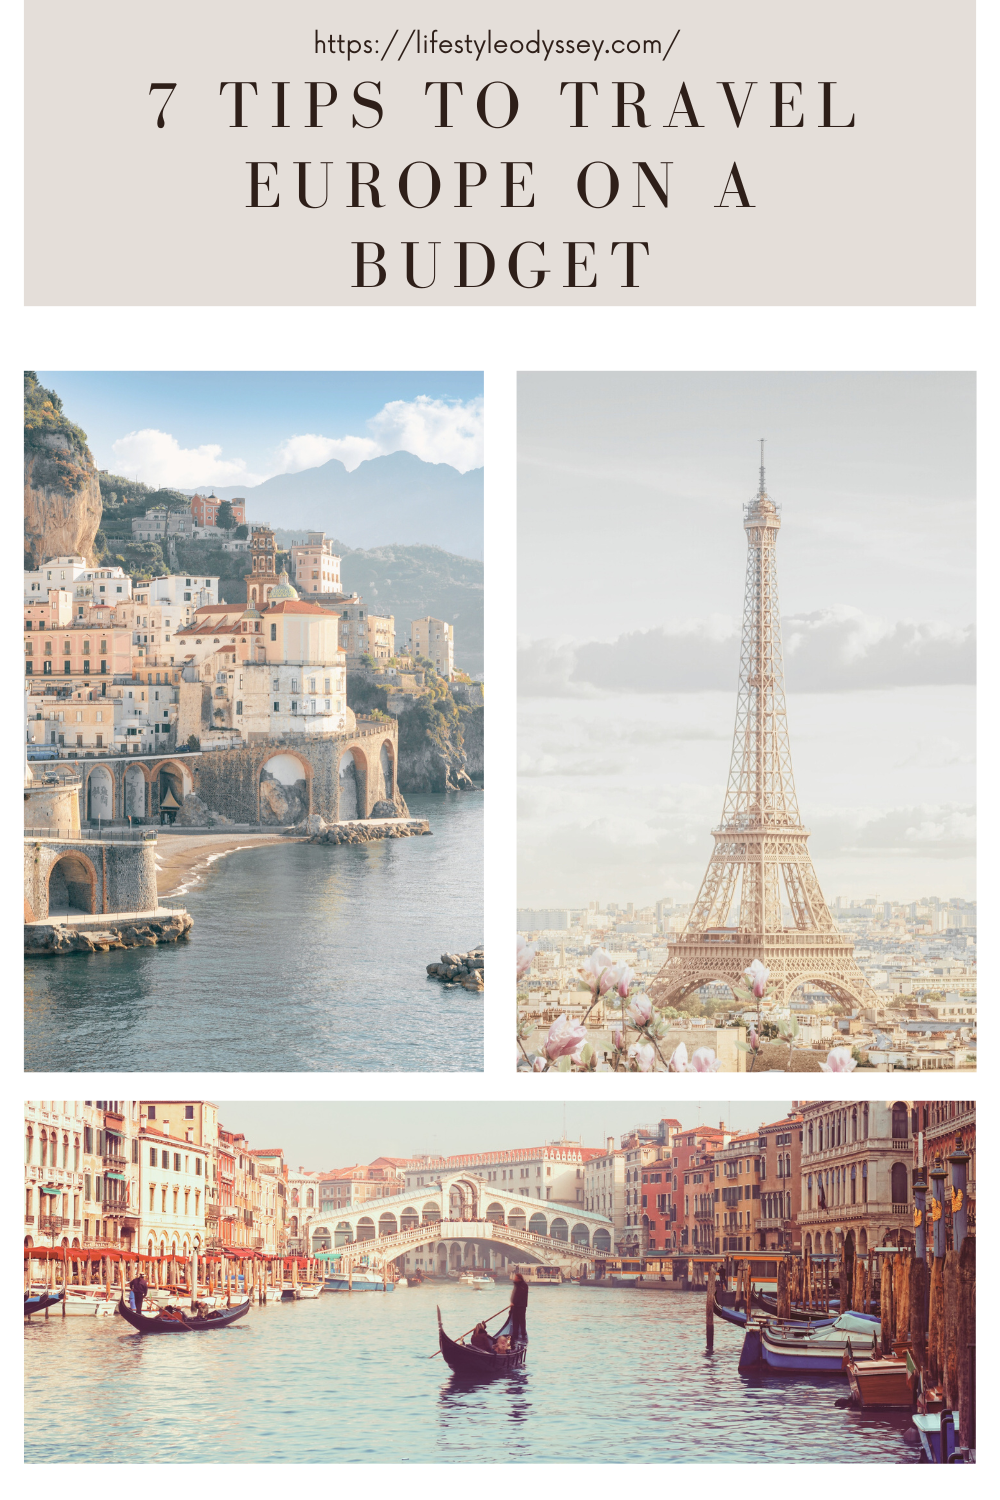 7 Tips to Travel Europe on a Budget